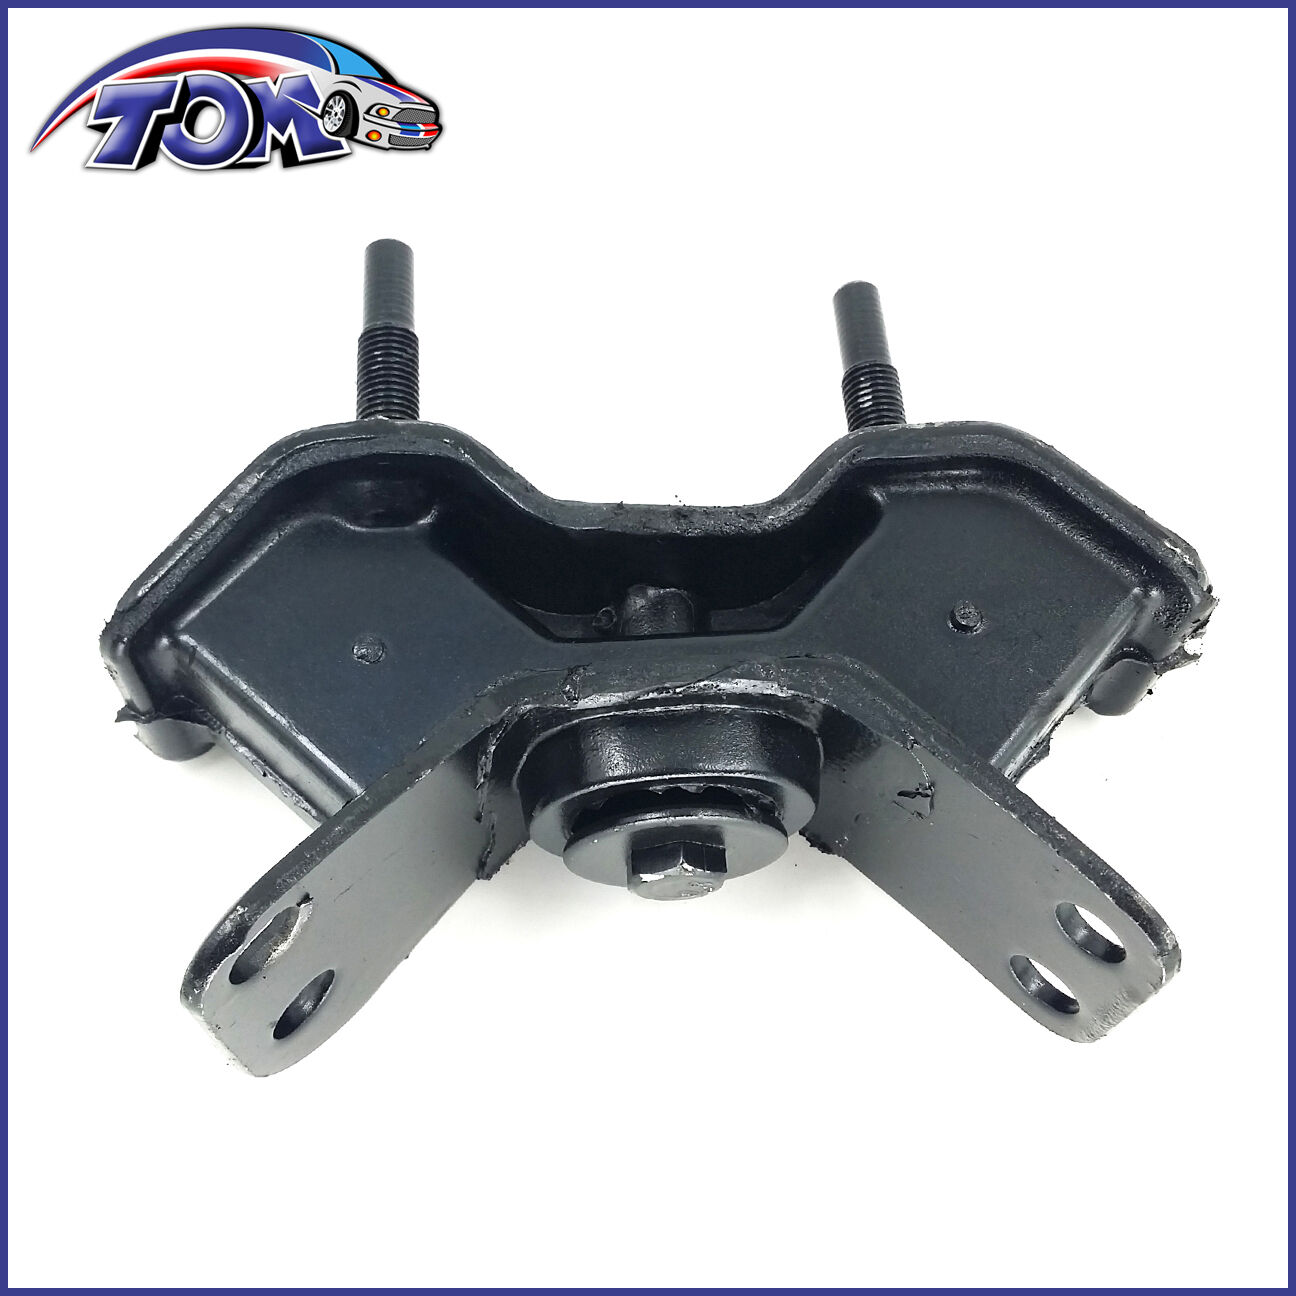 New Engine Trans Motor Mount For Toyota Camry Avalon Siena 3.0L for Auto.